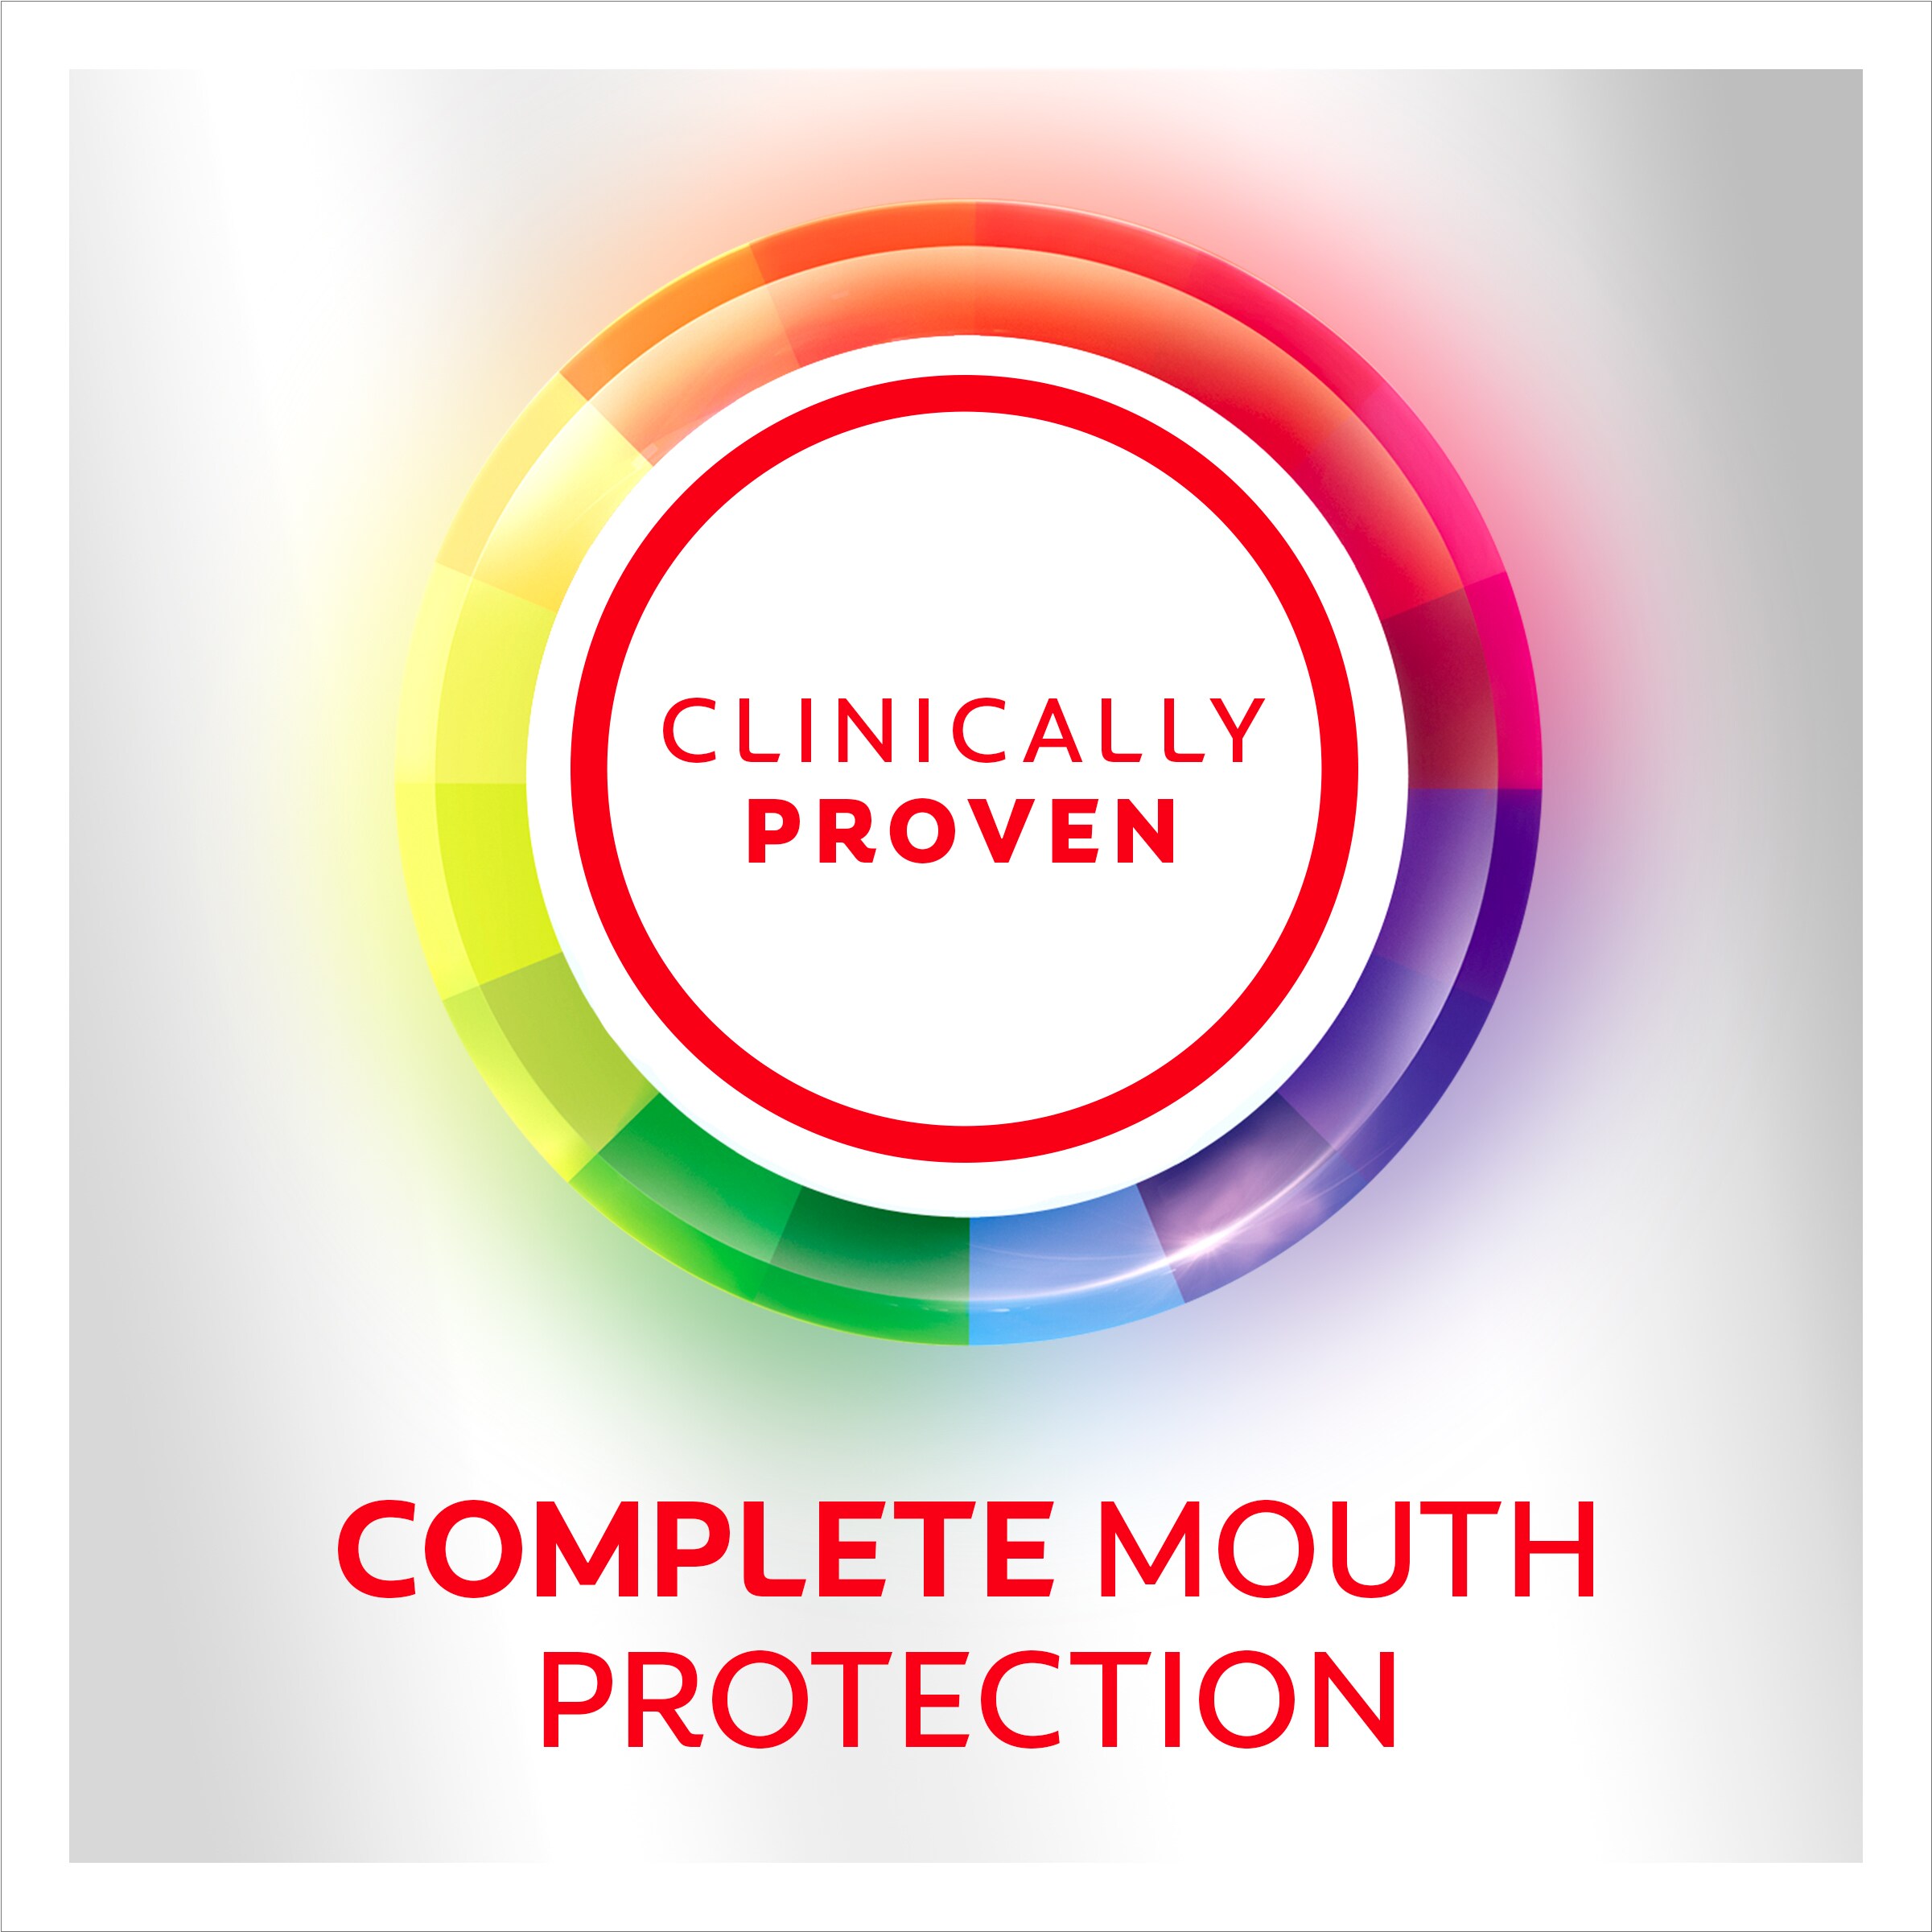 Complete mouth protection